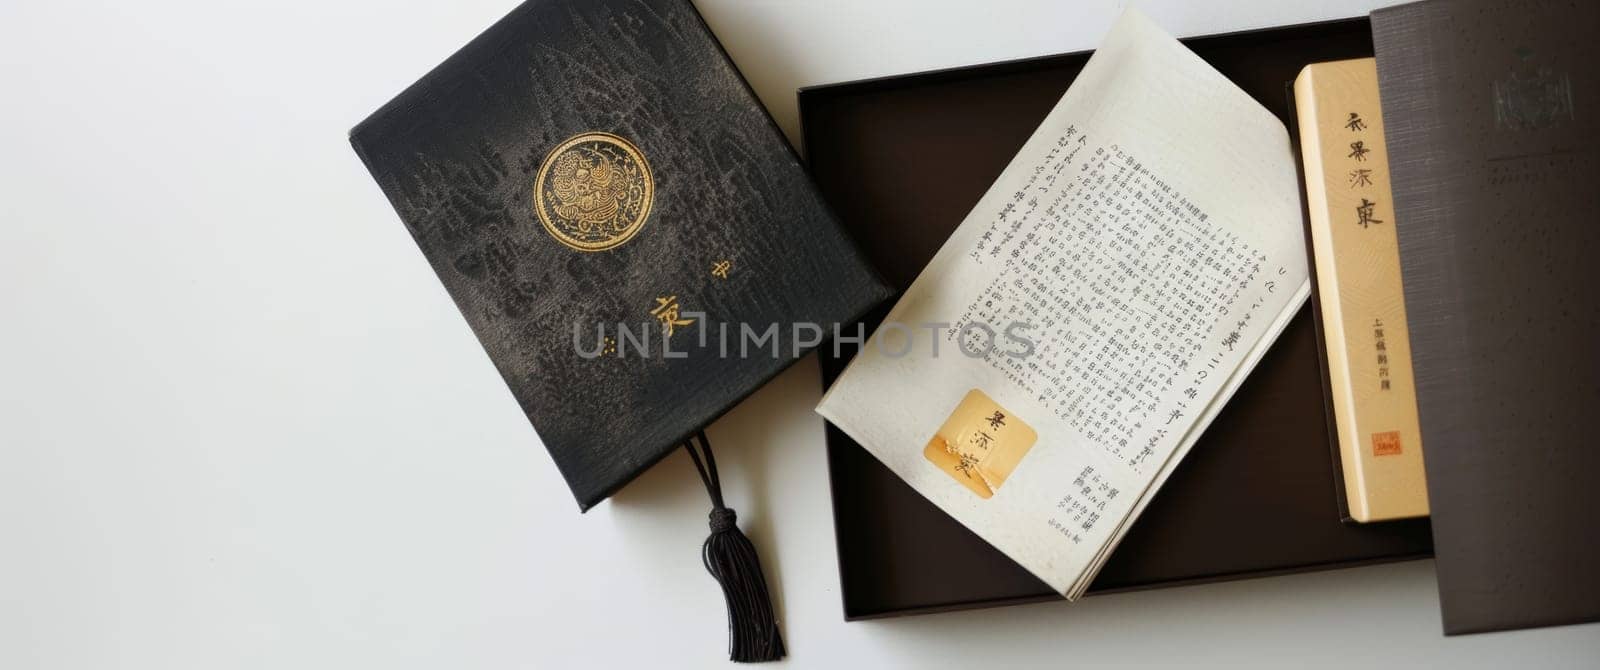 A black-covered Japanese book with an intricate golden emblem and Chinese characters, complemented by two other books and a box on a white background. by sfinks